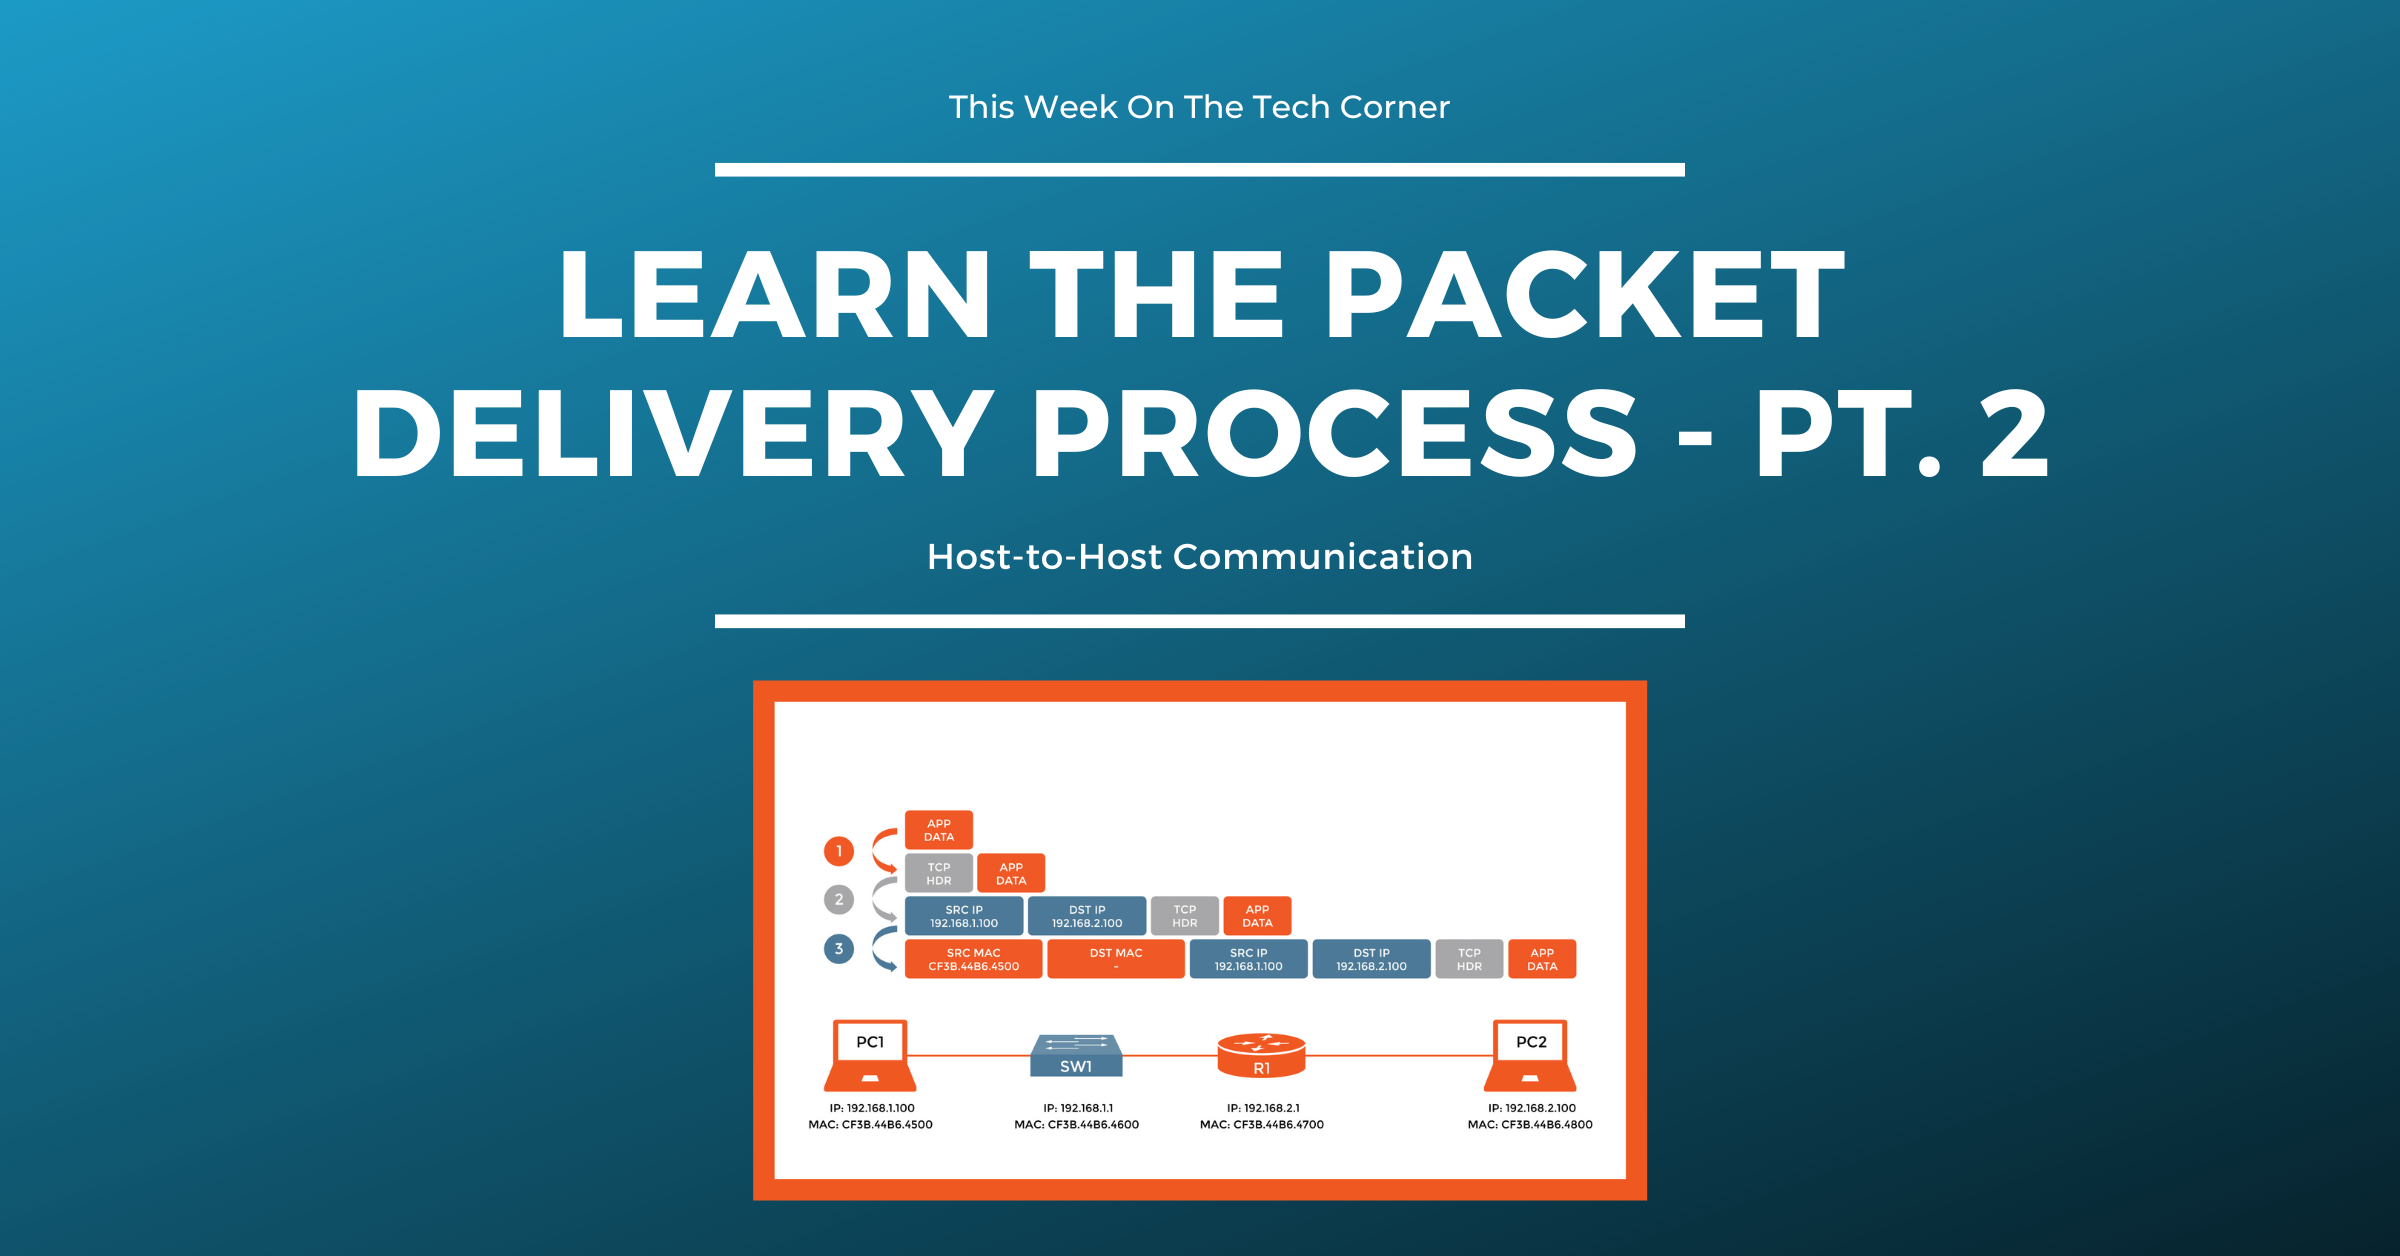 Learn the Packet Delivery Process (Host-to-Host Communication) - Pt. 2